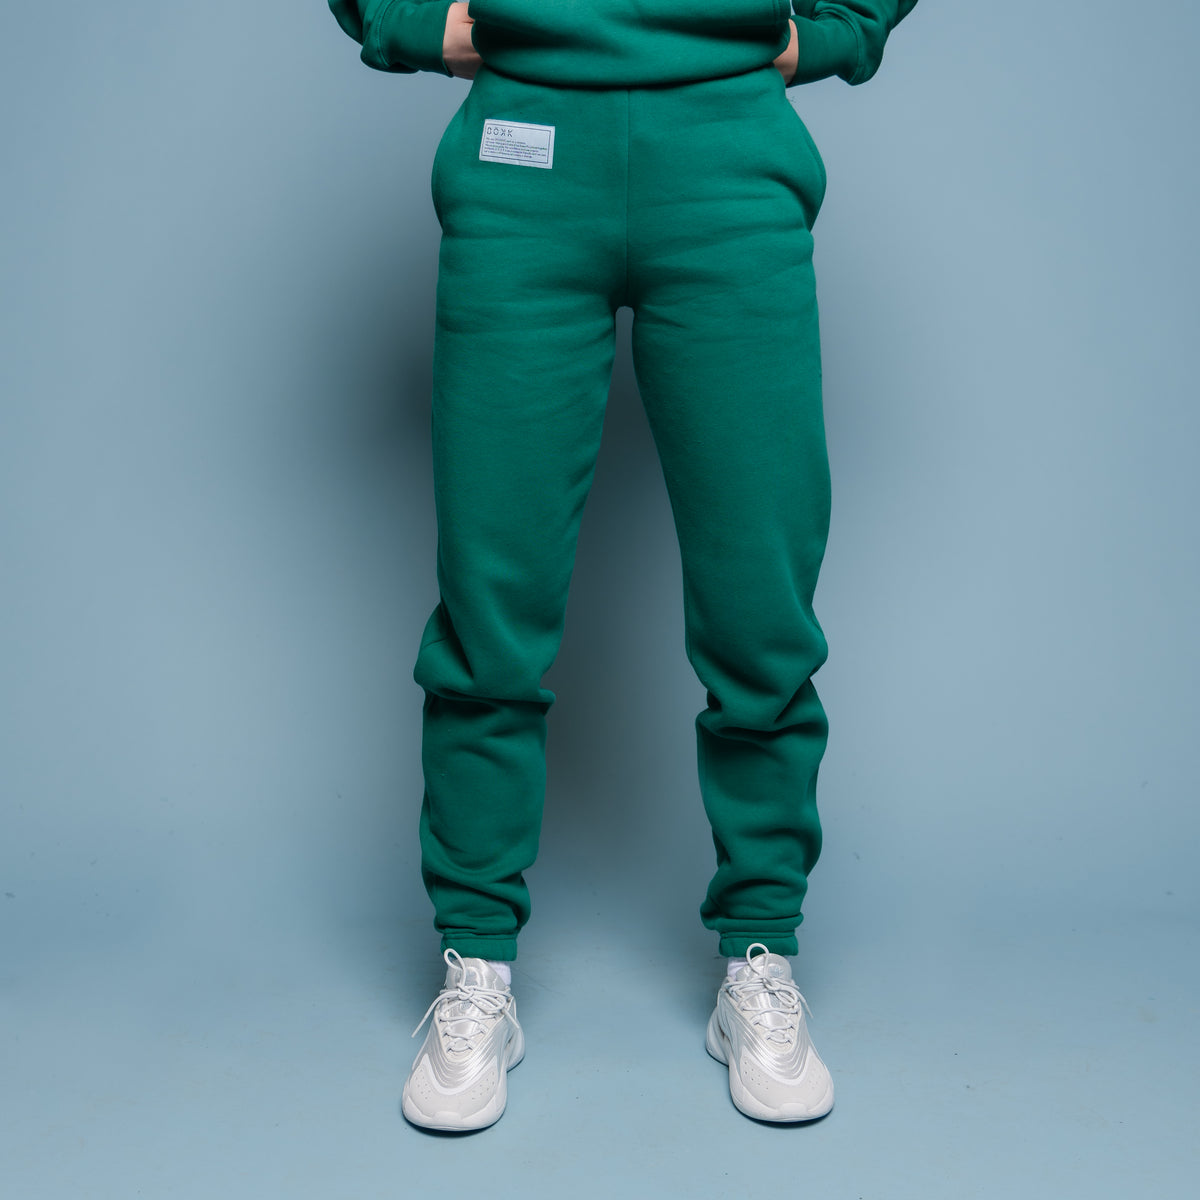 Joggers in Forest green